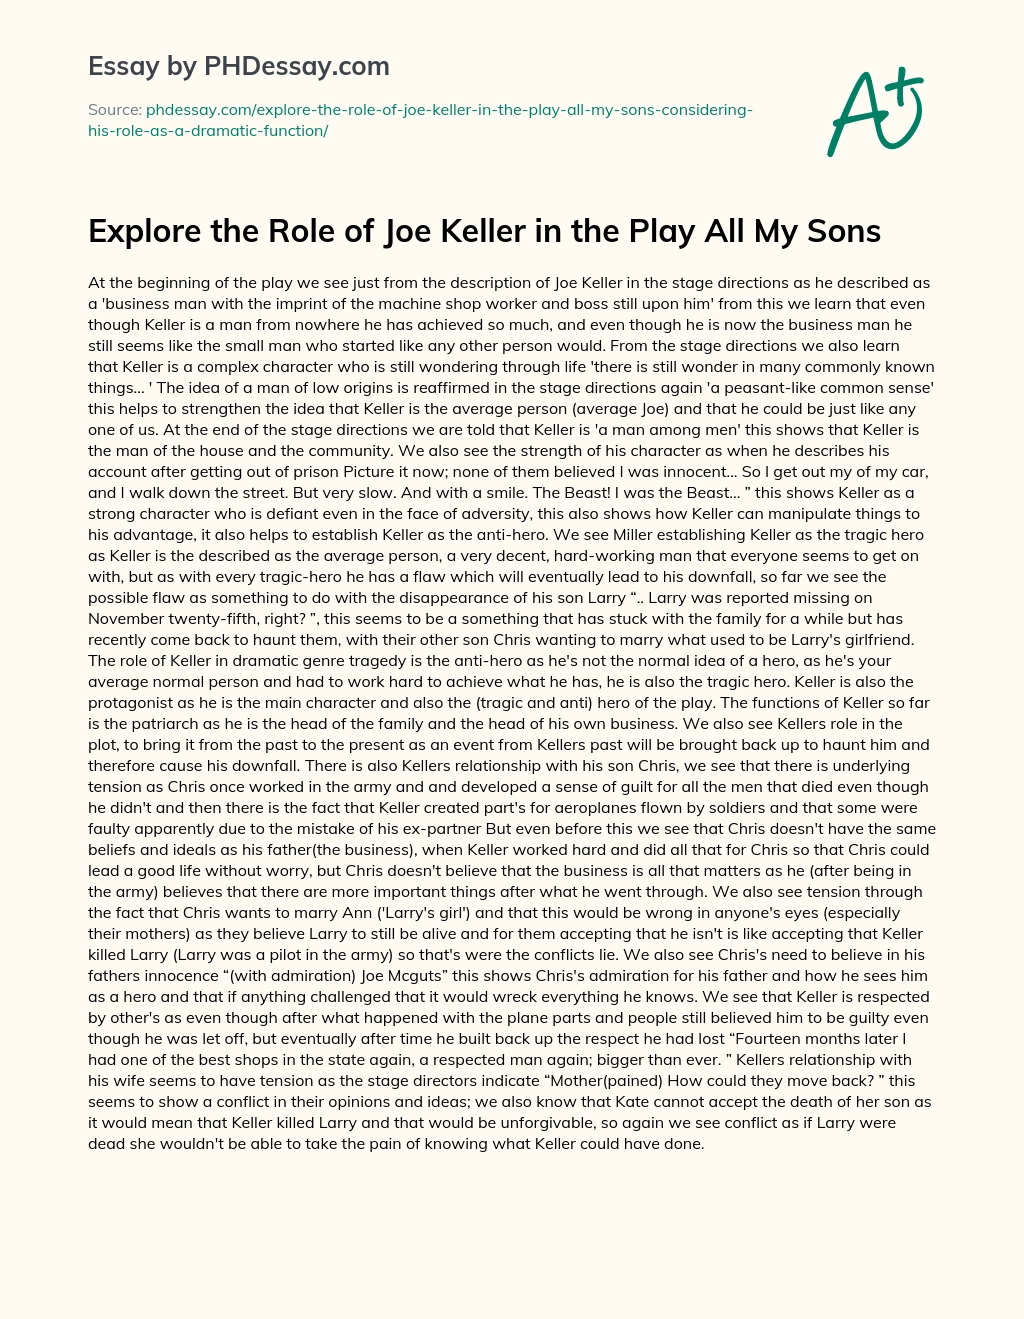 Explore the Role of Joe Keller in the Play All My Sons essay